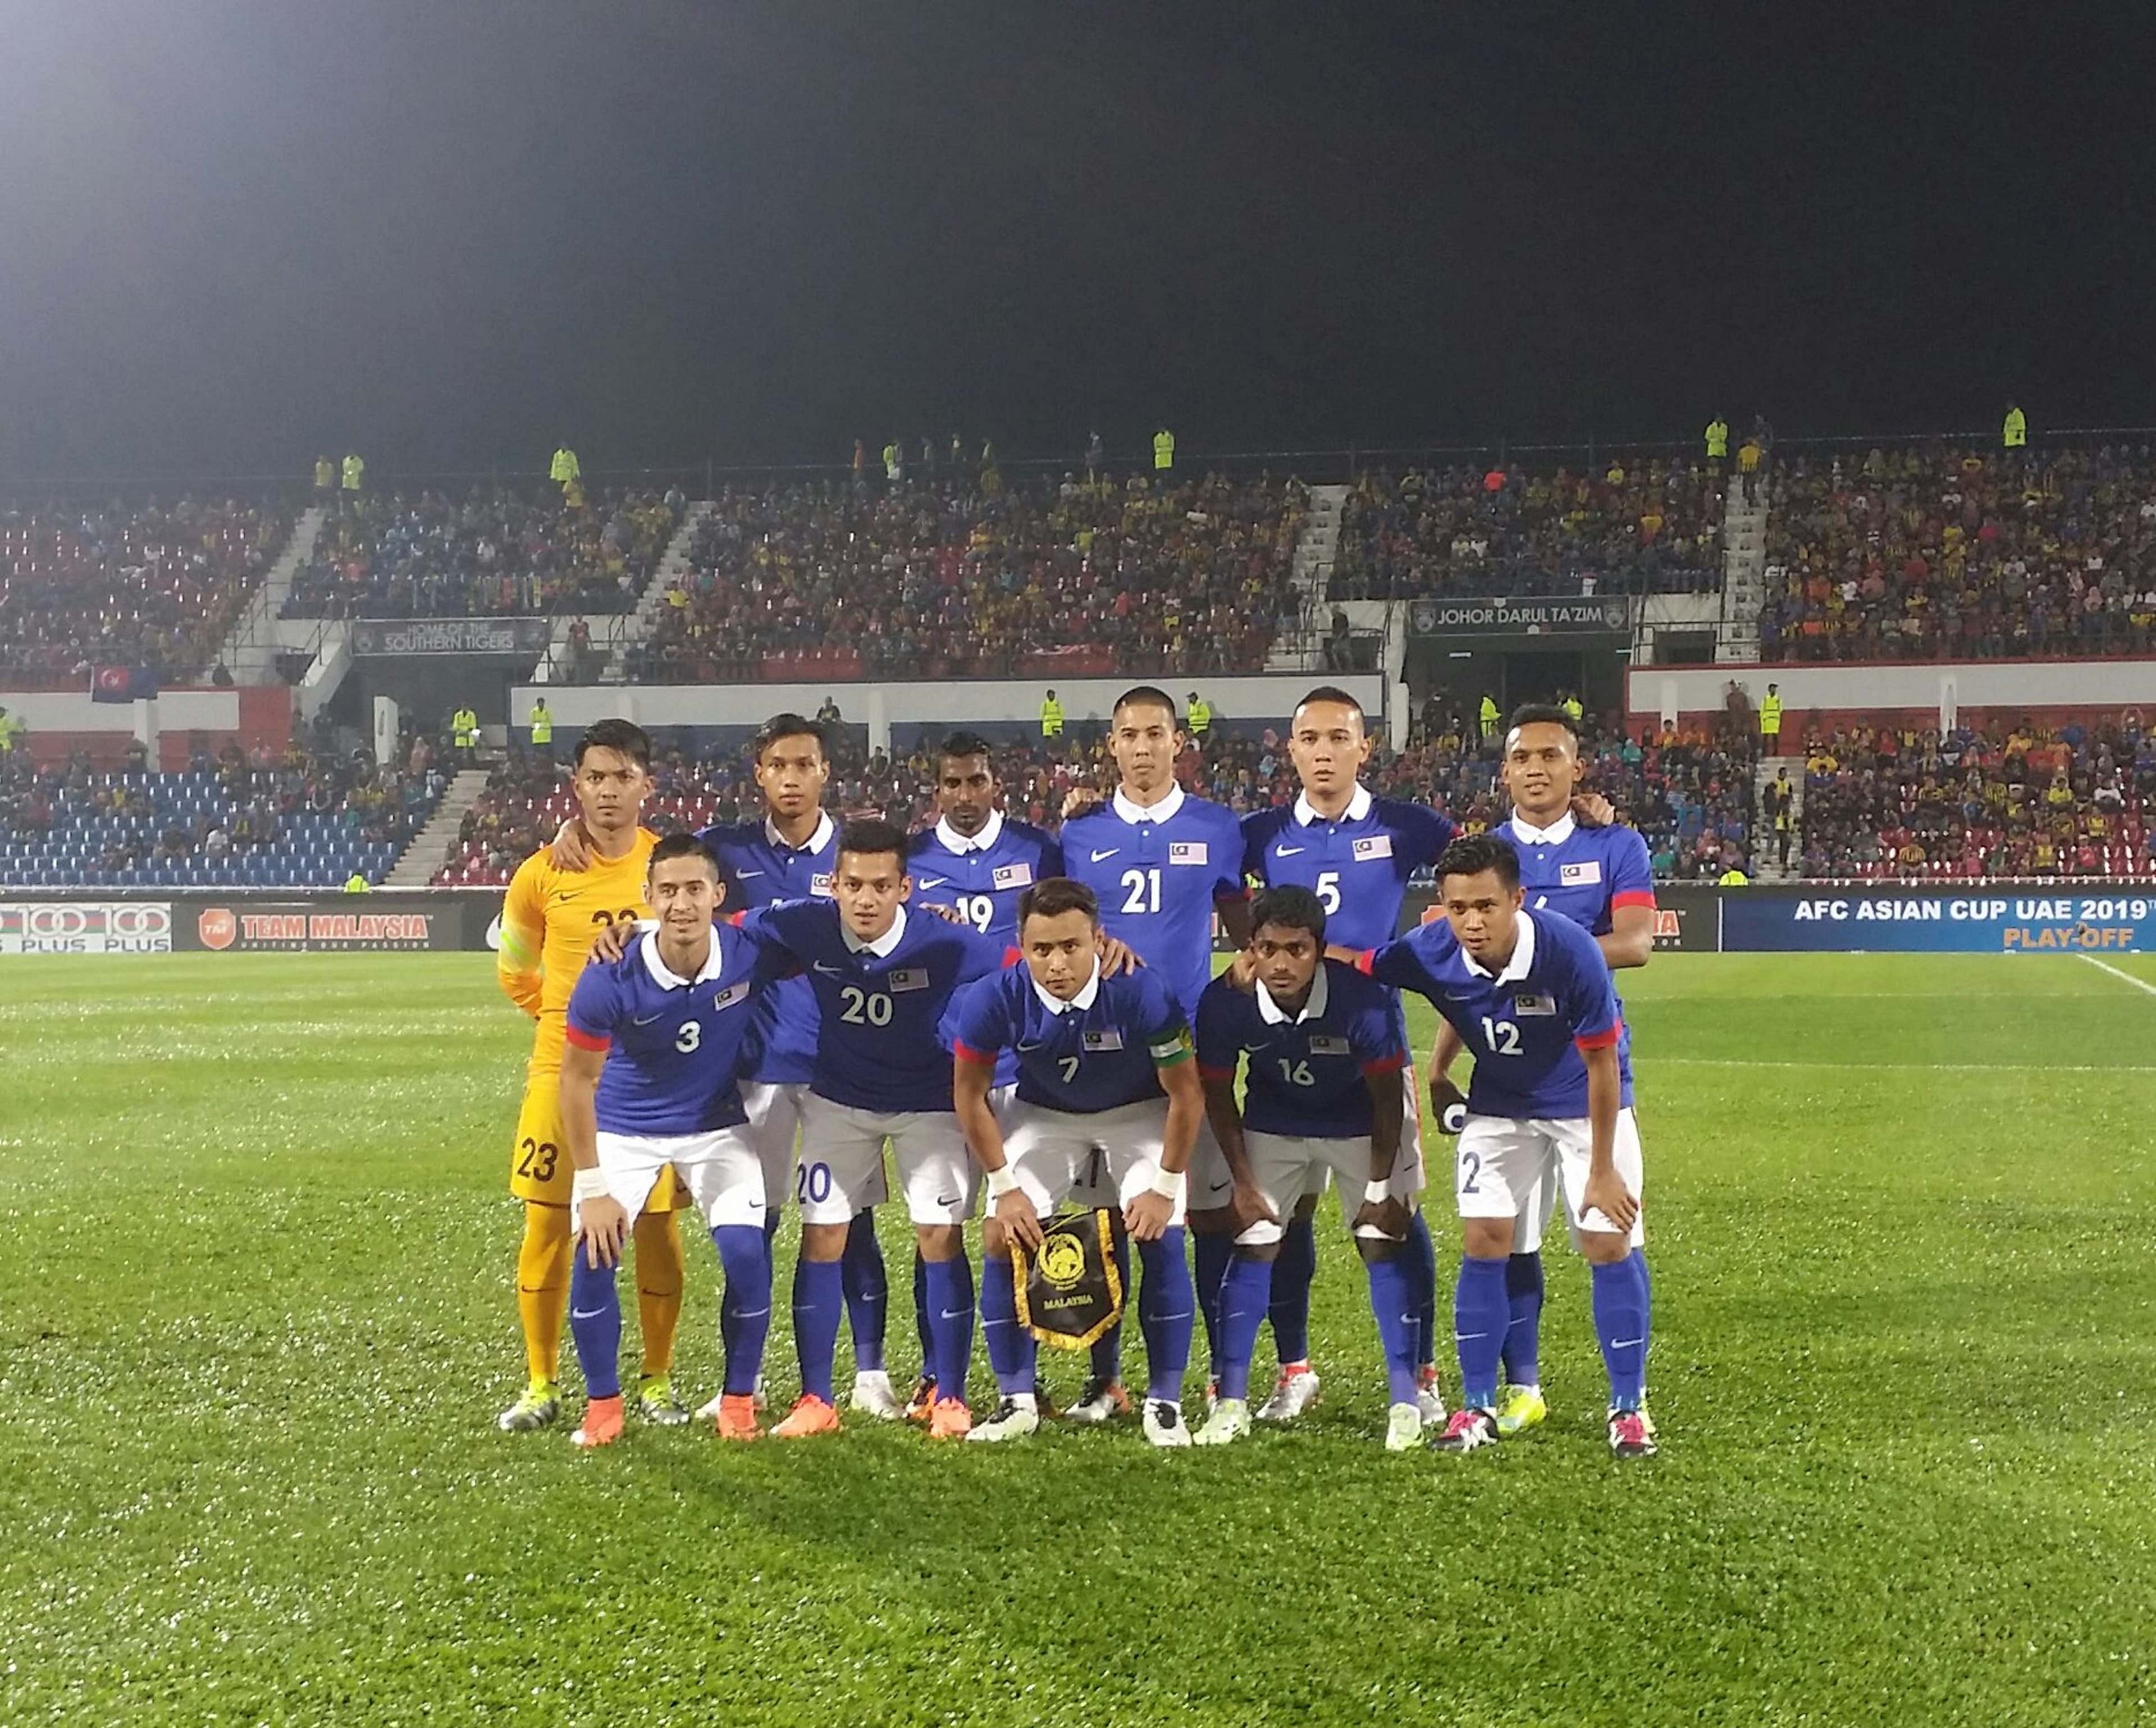 Malaysia before their Timor Leste match 2016